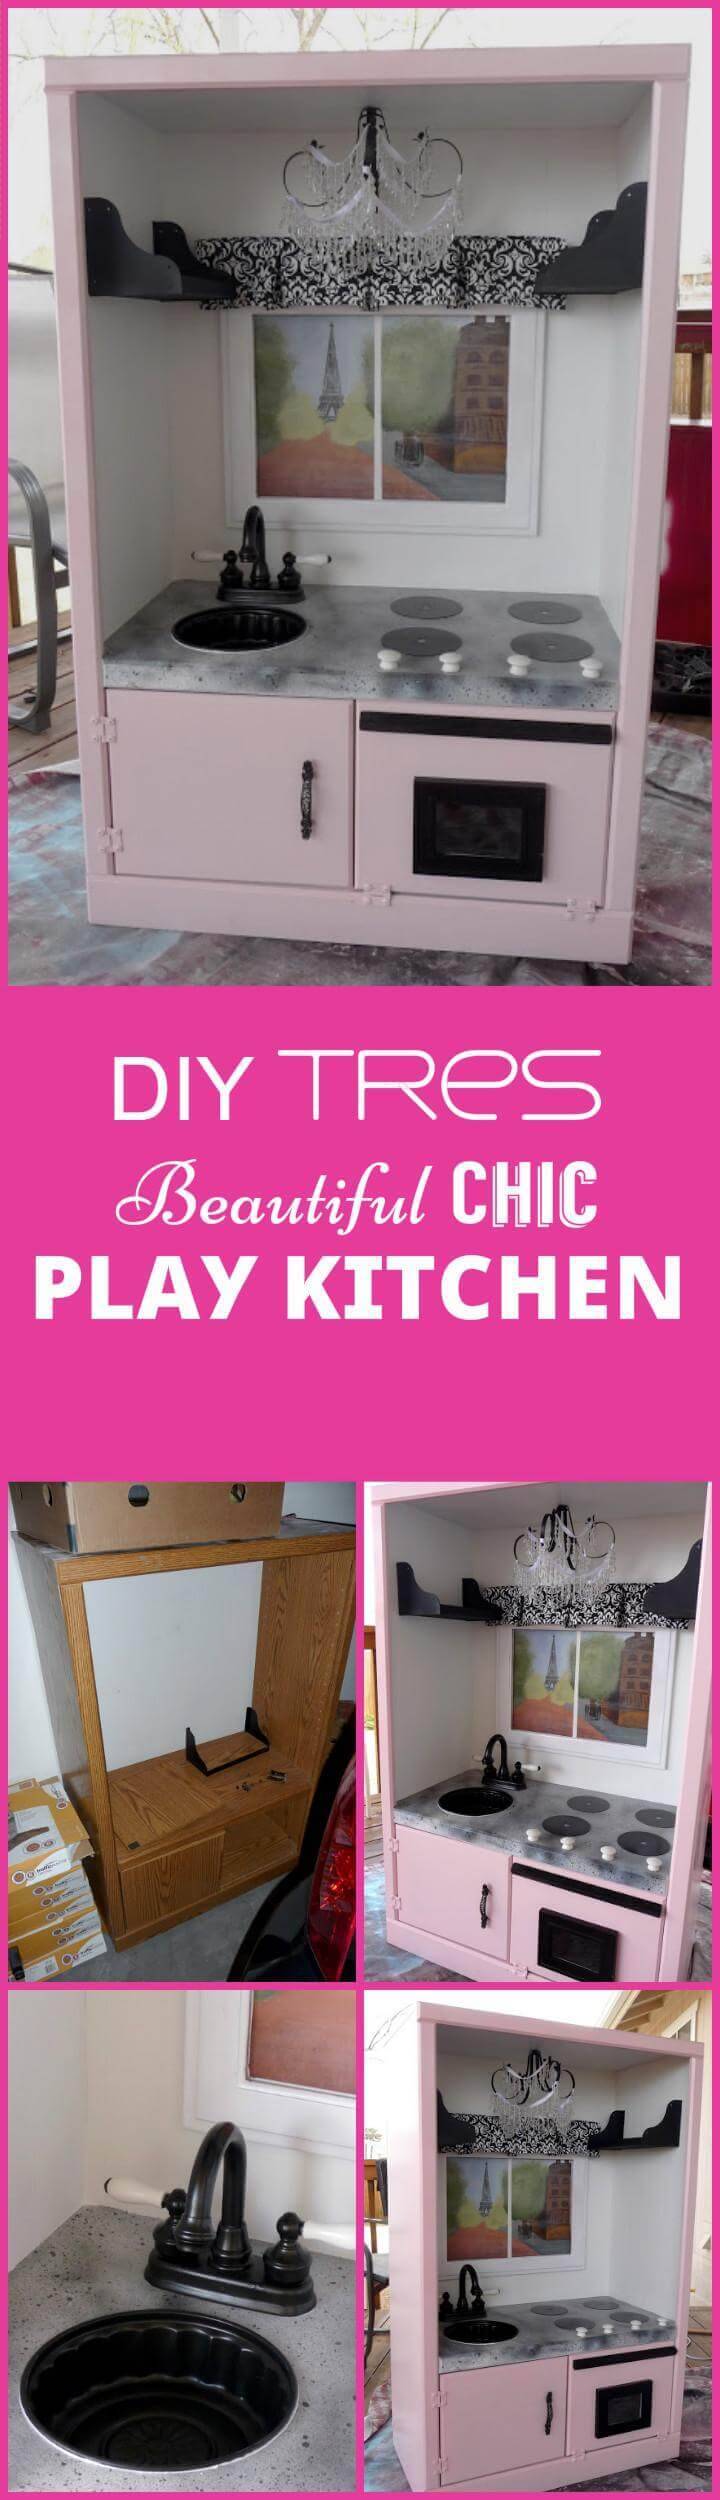 easy yet beautiful tres beautiful chic play kitchen